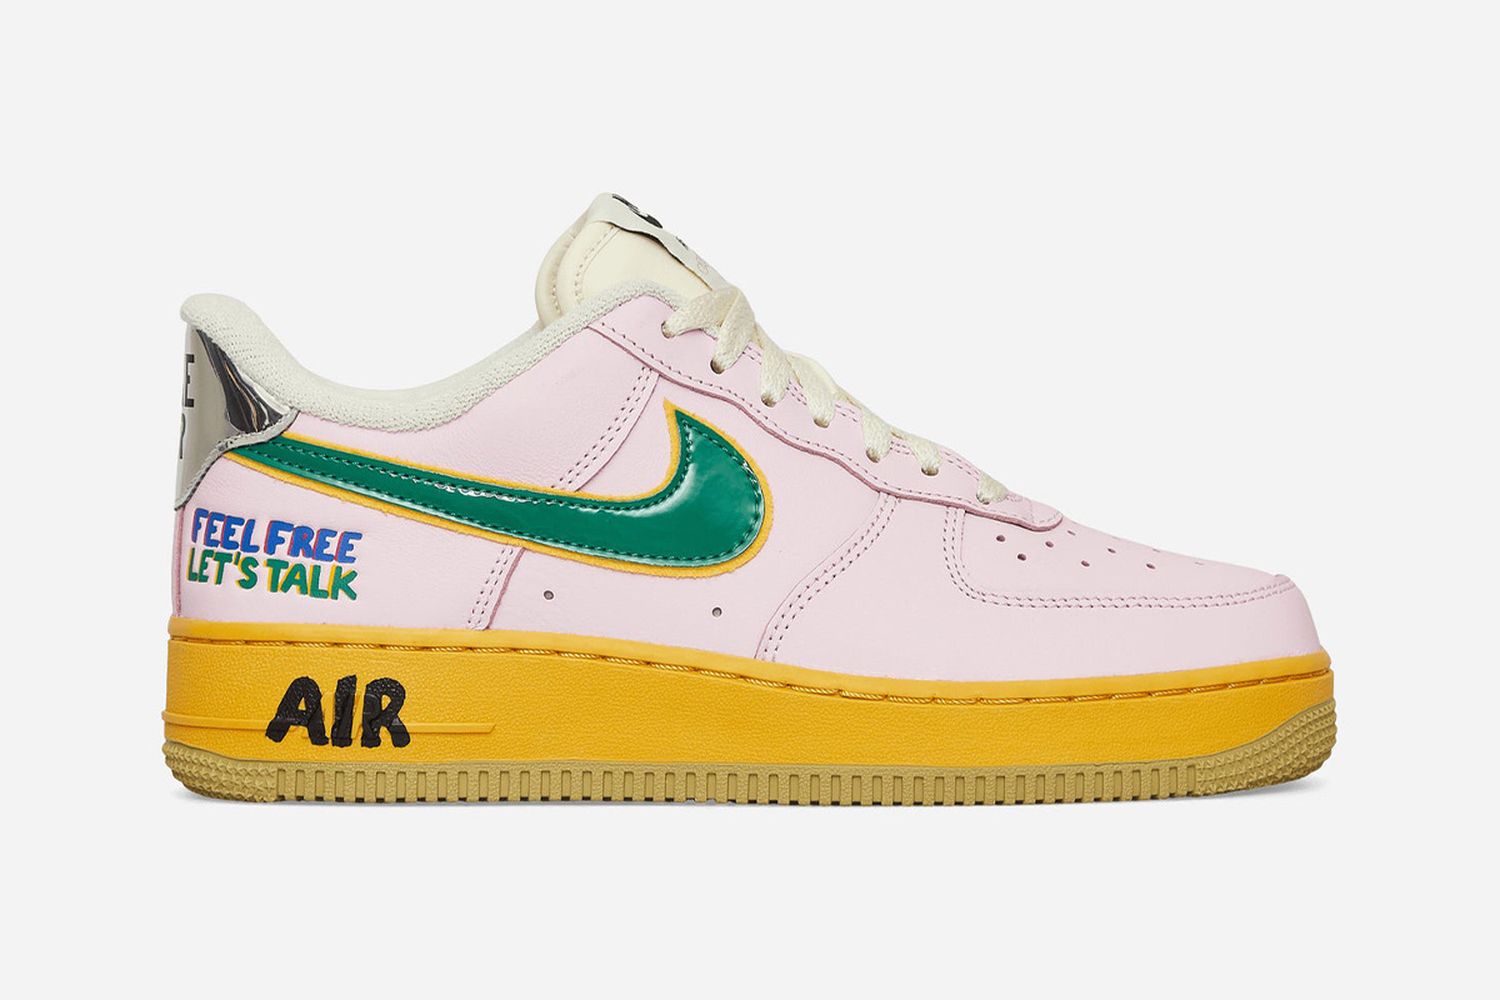 Air Force 1 '07 “Feel Free, Let’s Talk”